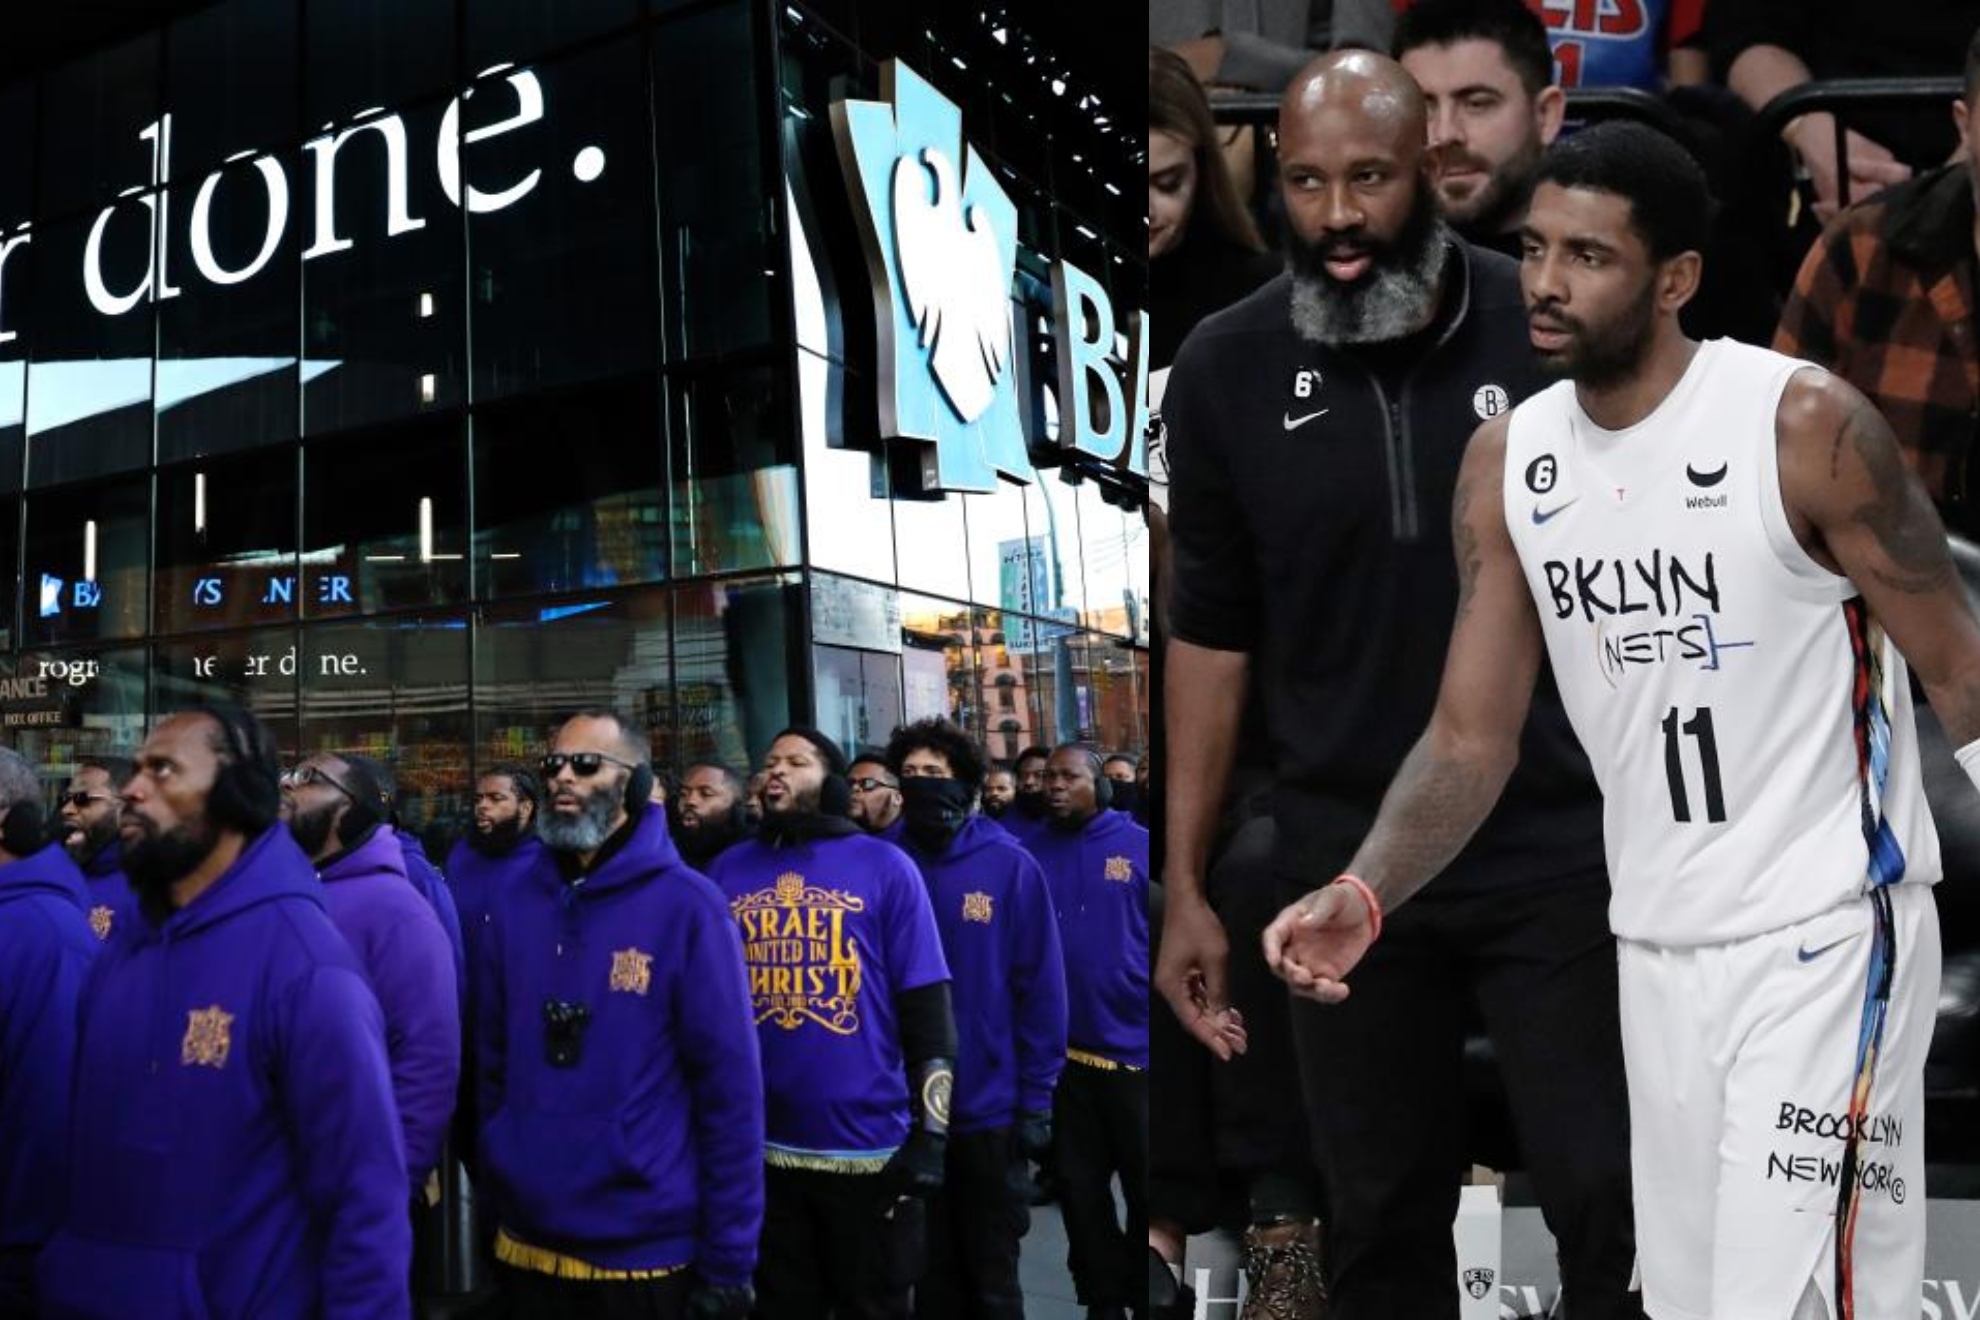 The Irving saga rages on, controversial group comes out in support of the Brooklyn Nets player